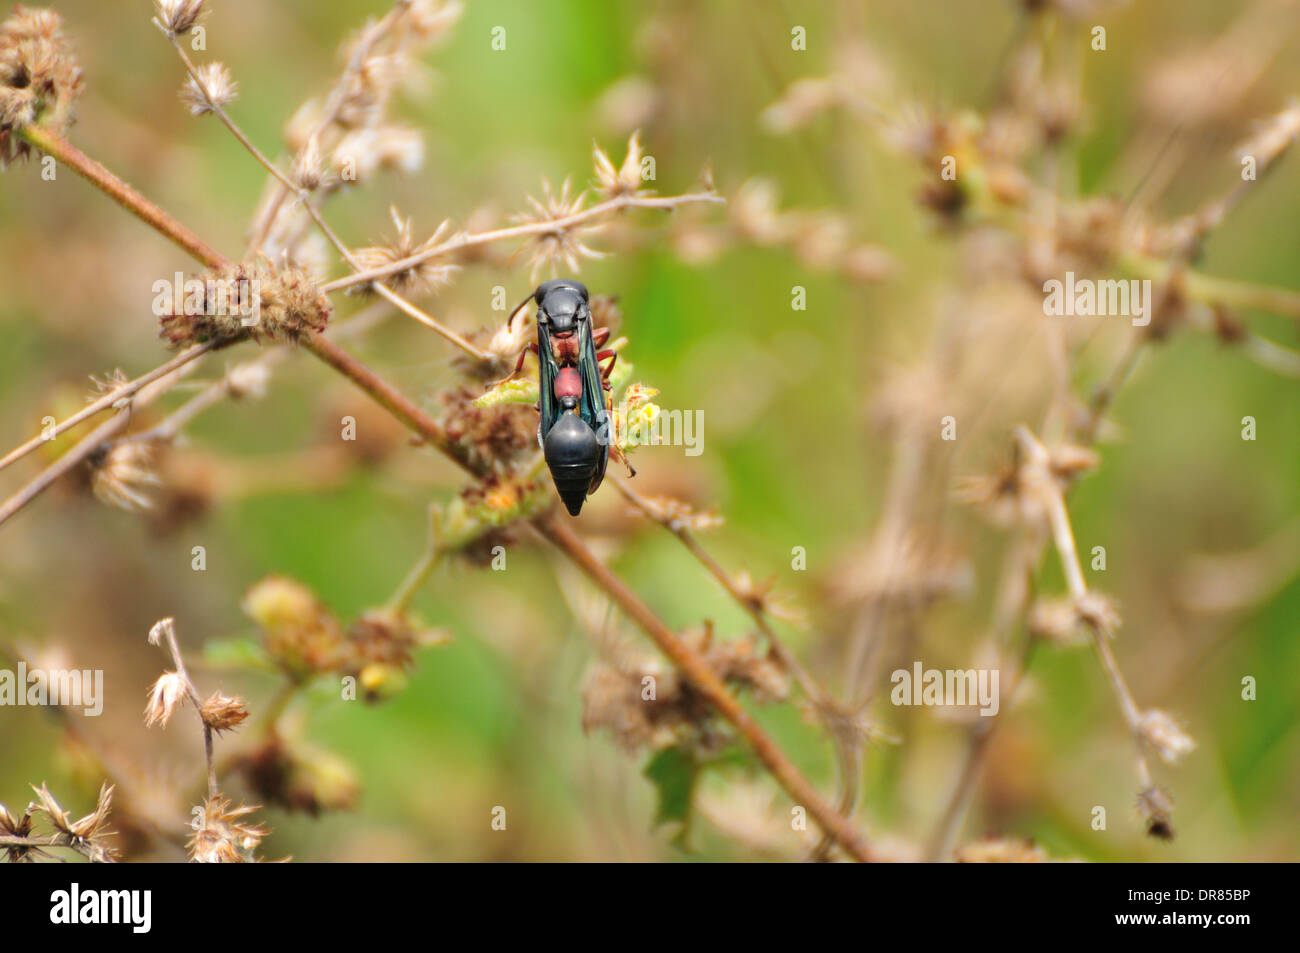 flying insect in brazil Stock Photo